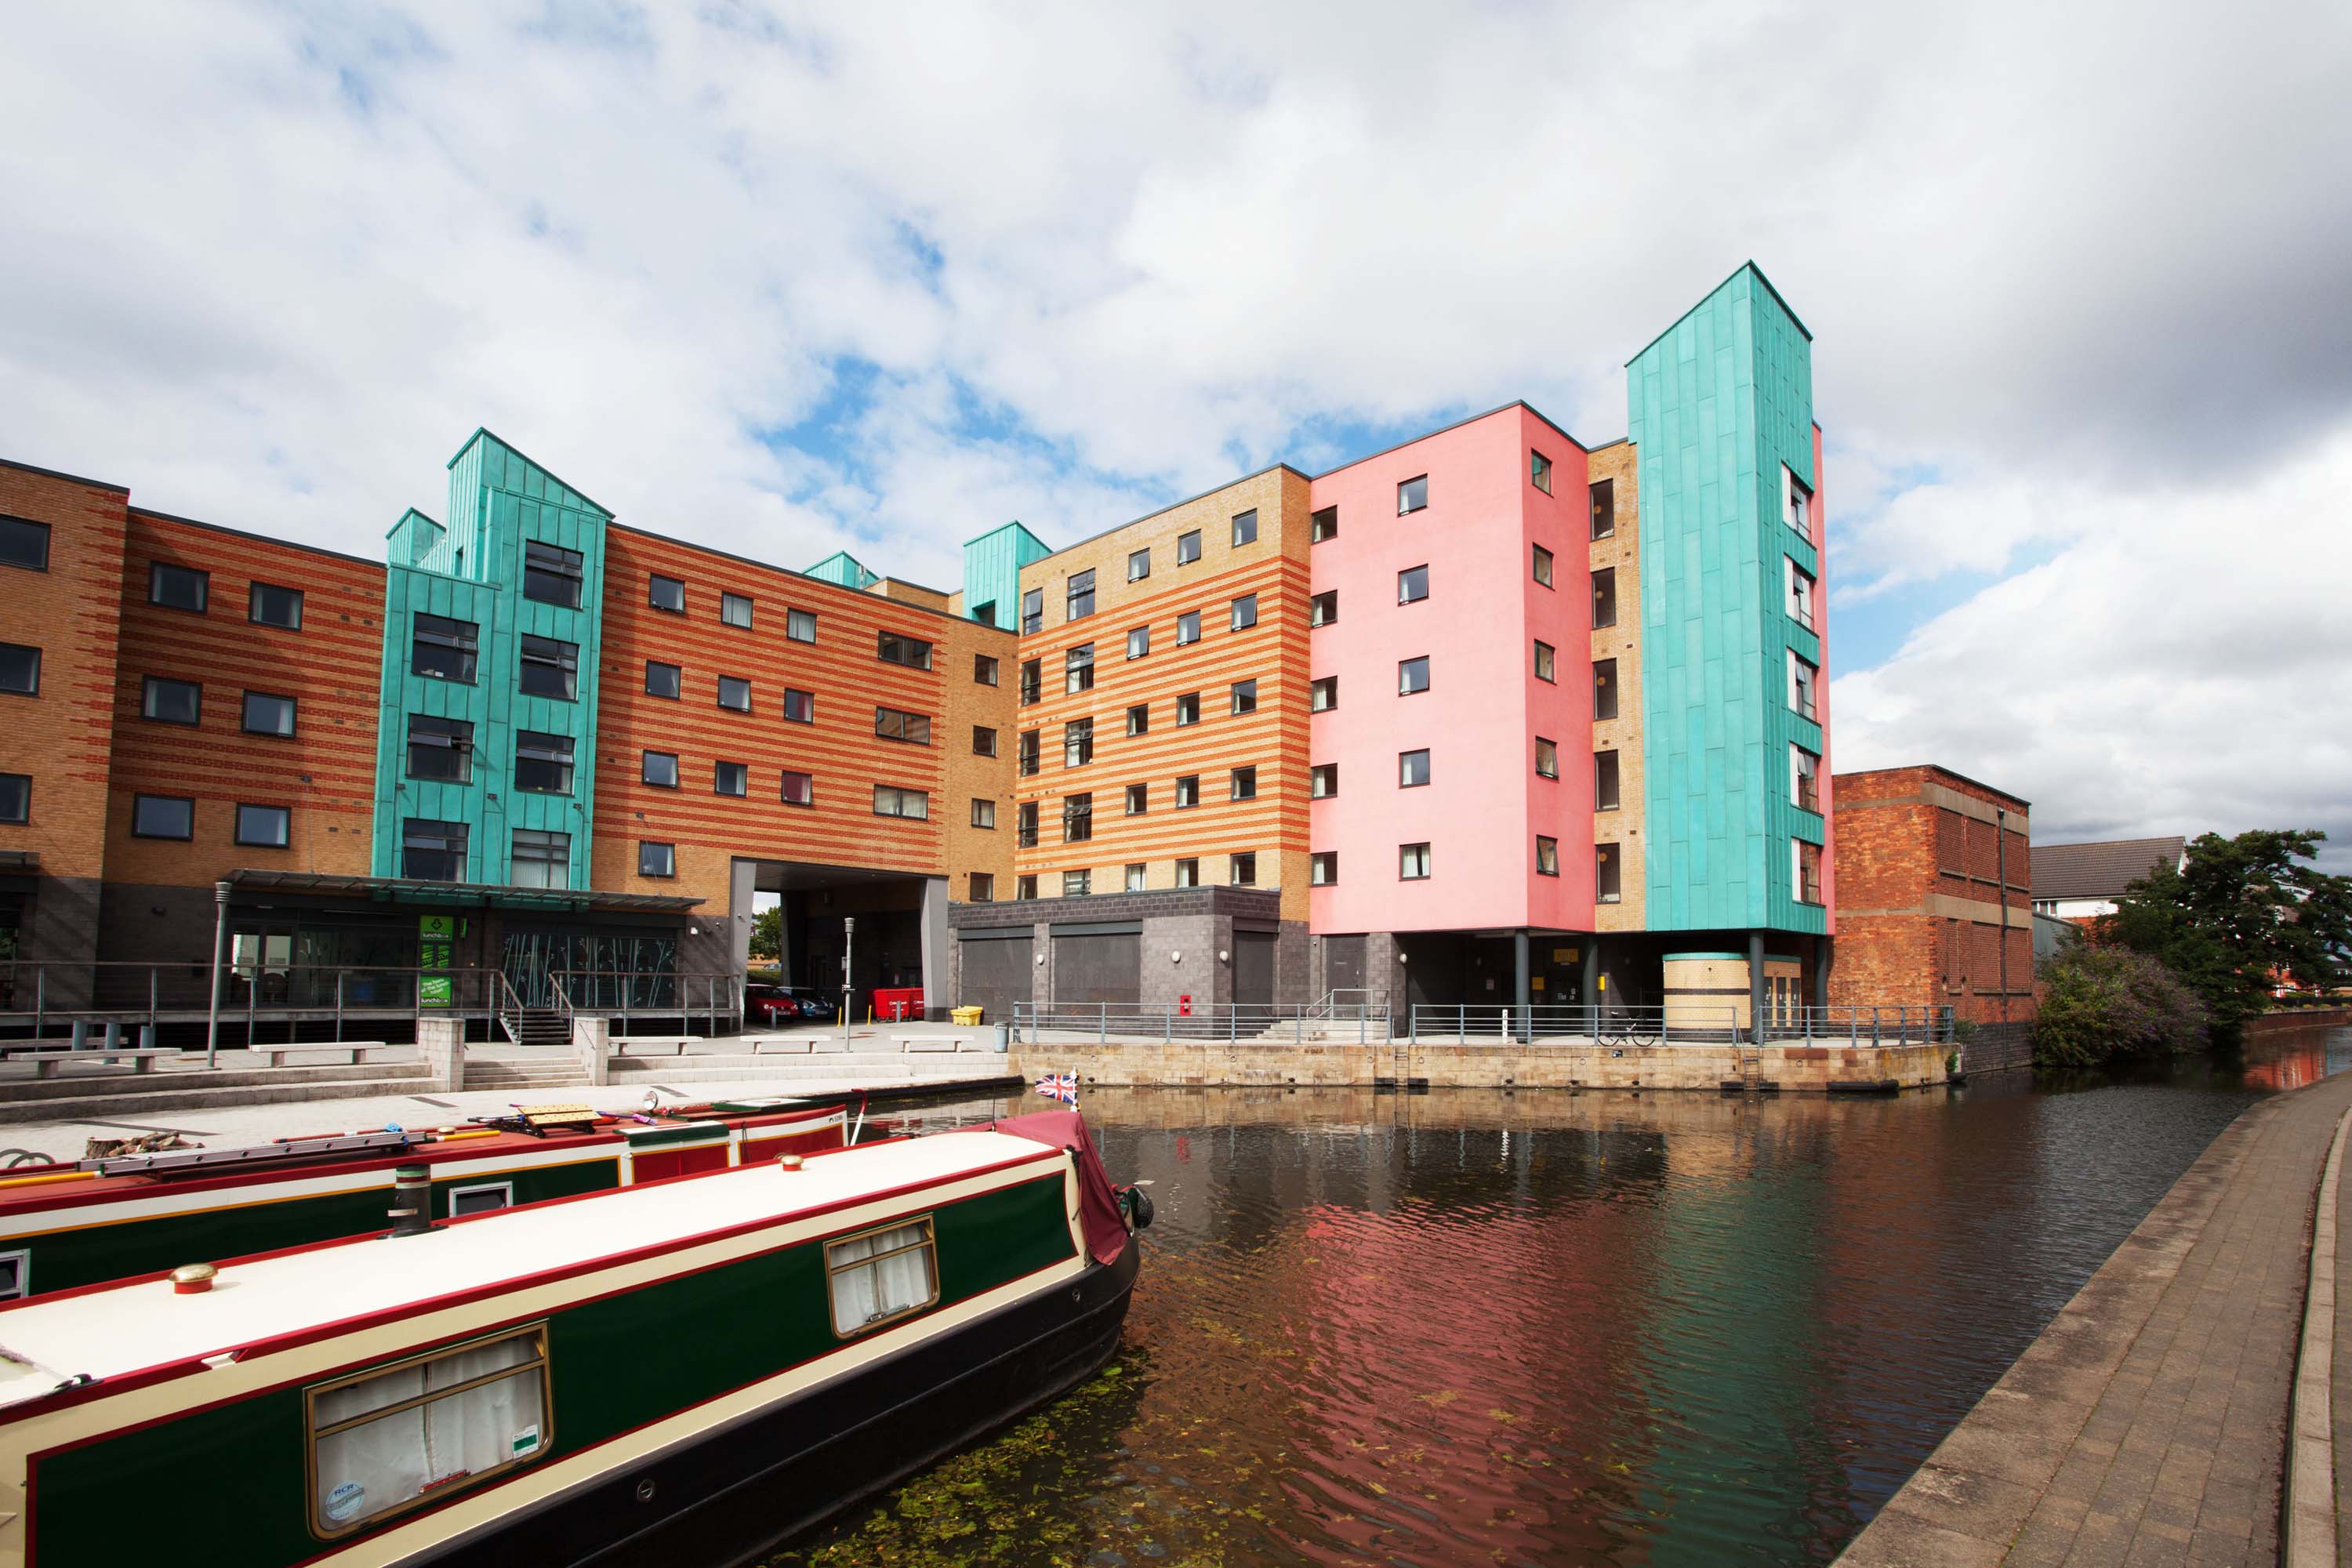 Unite Students accommodation at Waterways in Loughborough